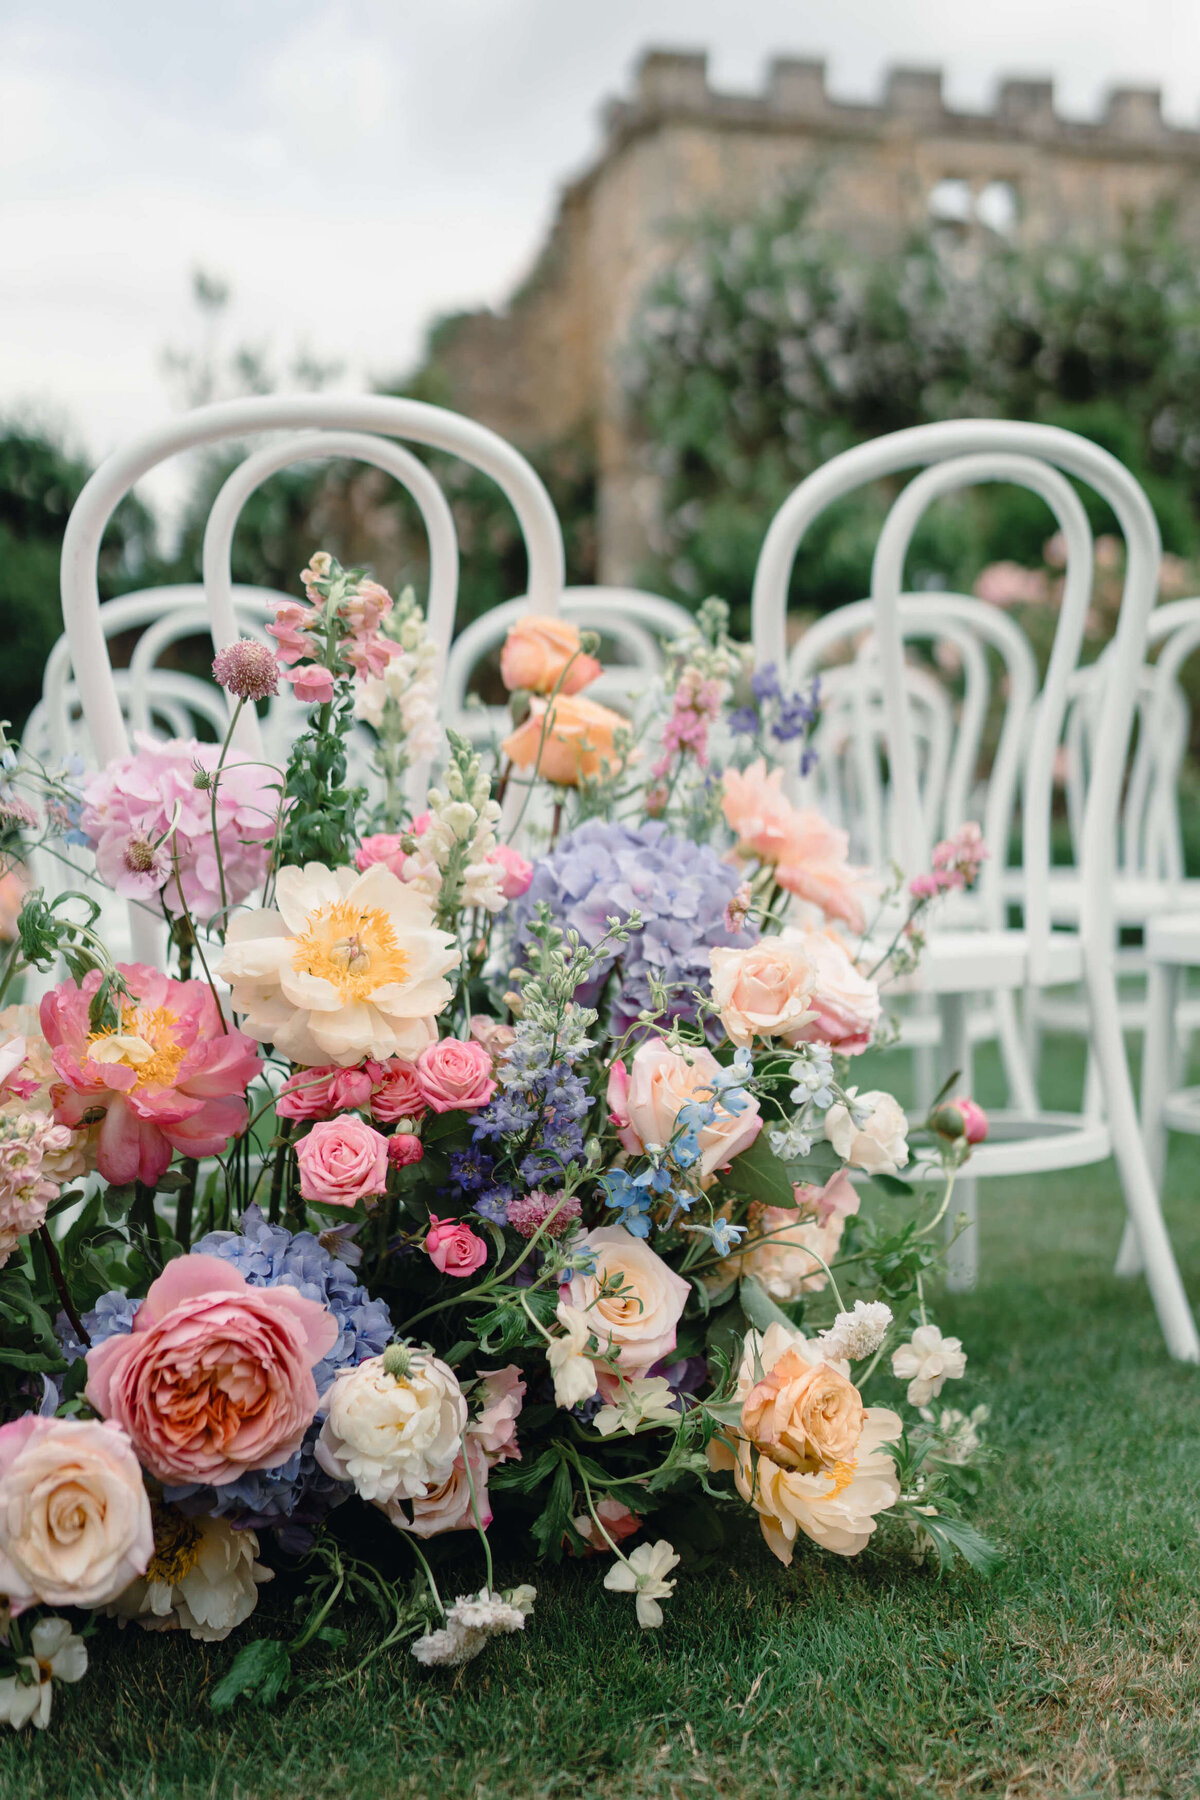 meadow of pink peach and purple romantic english summer flowers decorating a garden wedding aisle at romantic cotswold wedding venue euridge manor